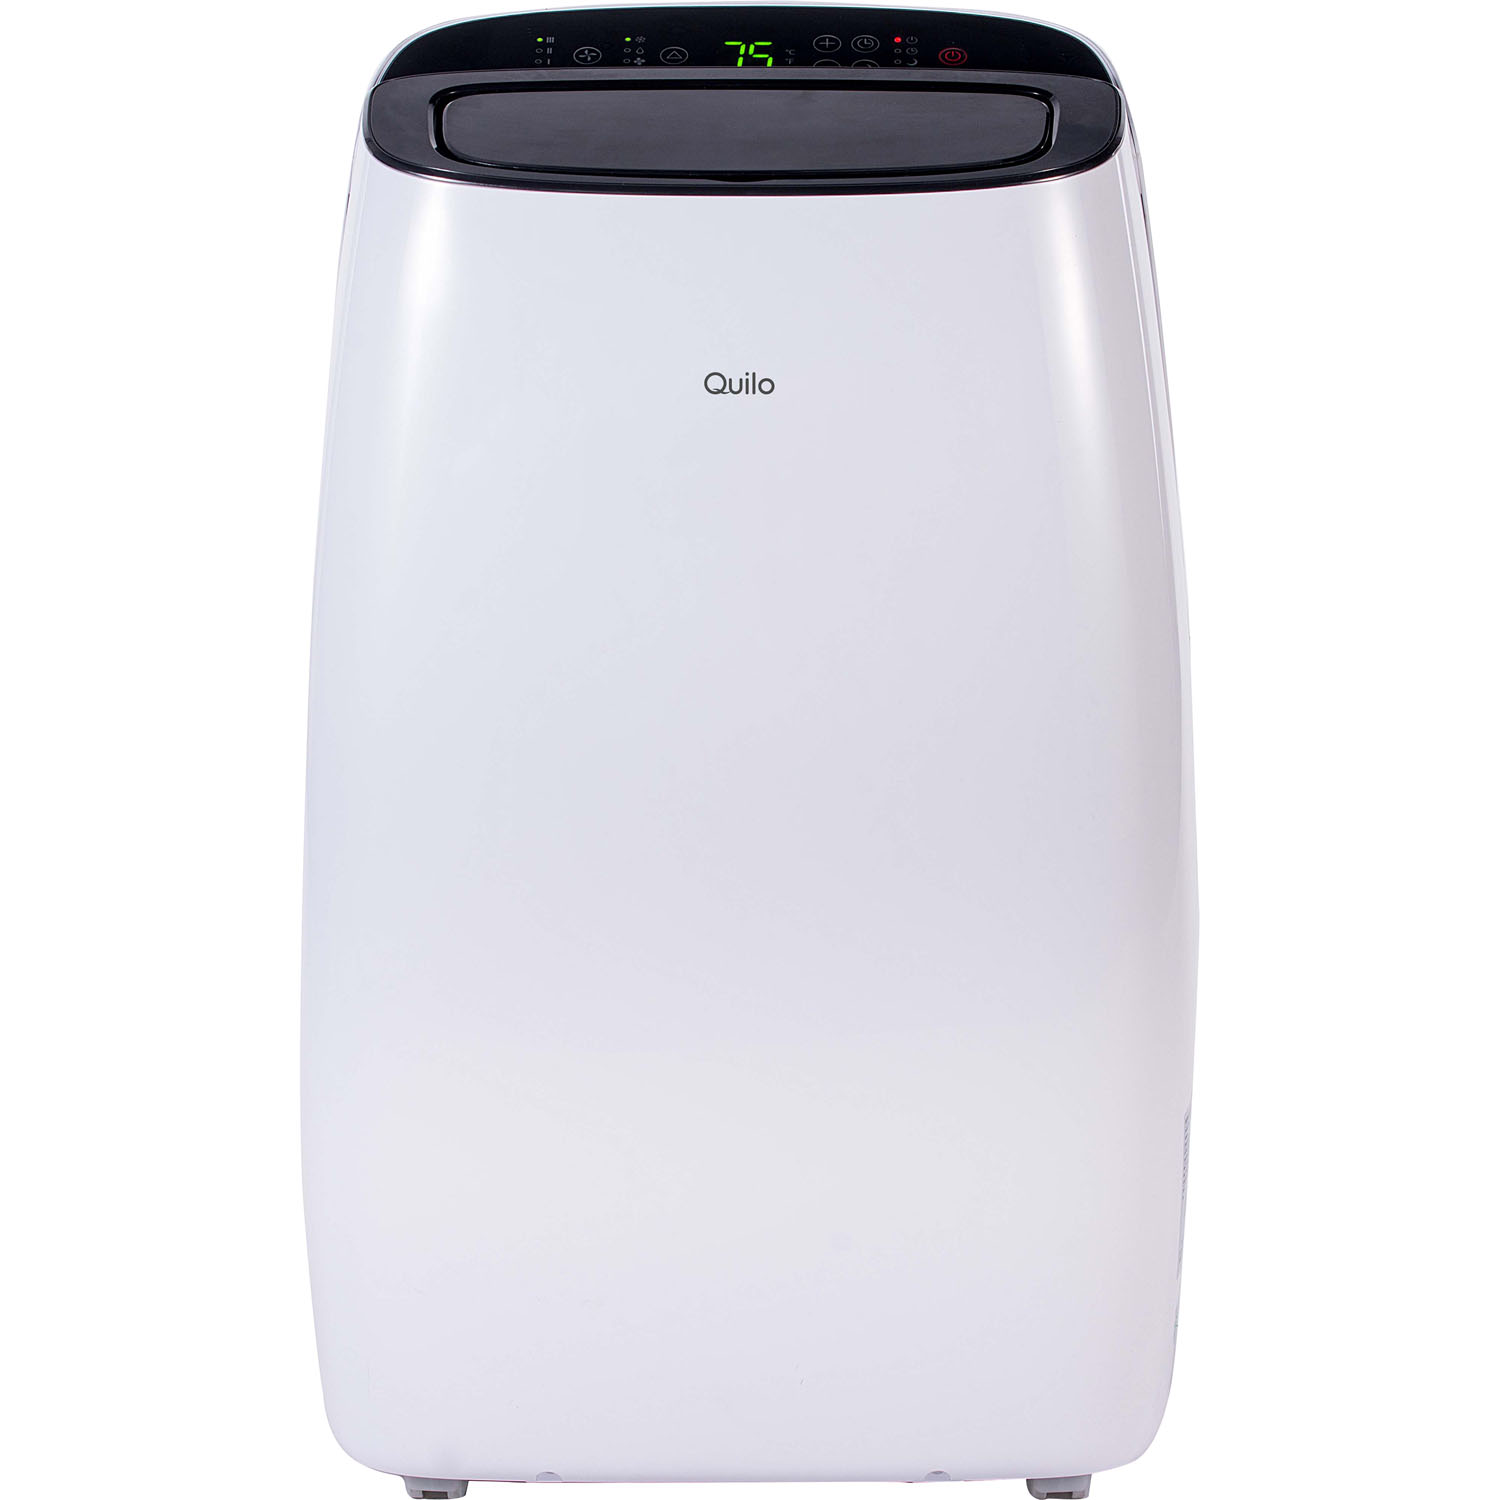 Quilo Portable Air Conditioner with Remote Control for a Room up to 550 Sq. Ft. - image 1 of 9